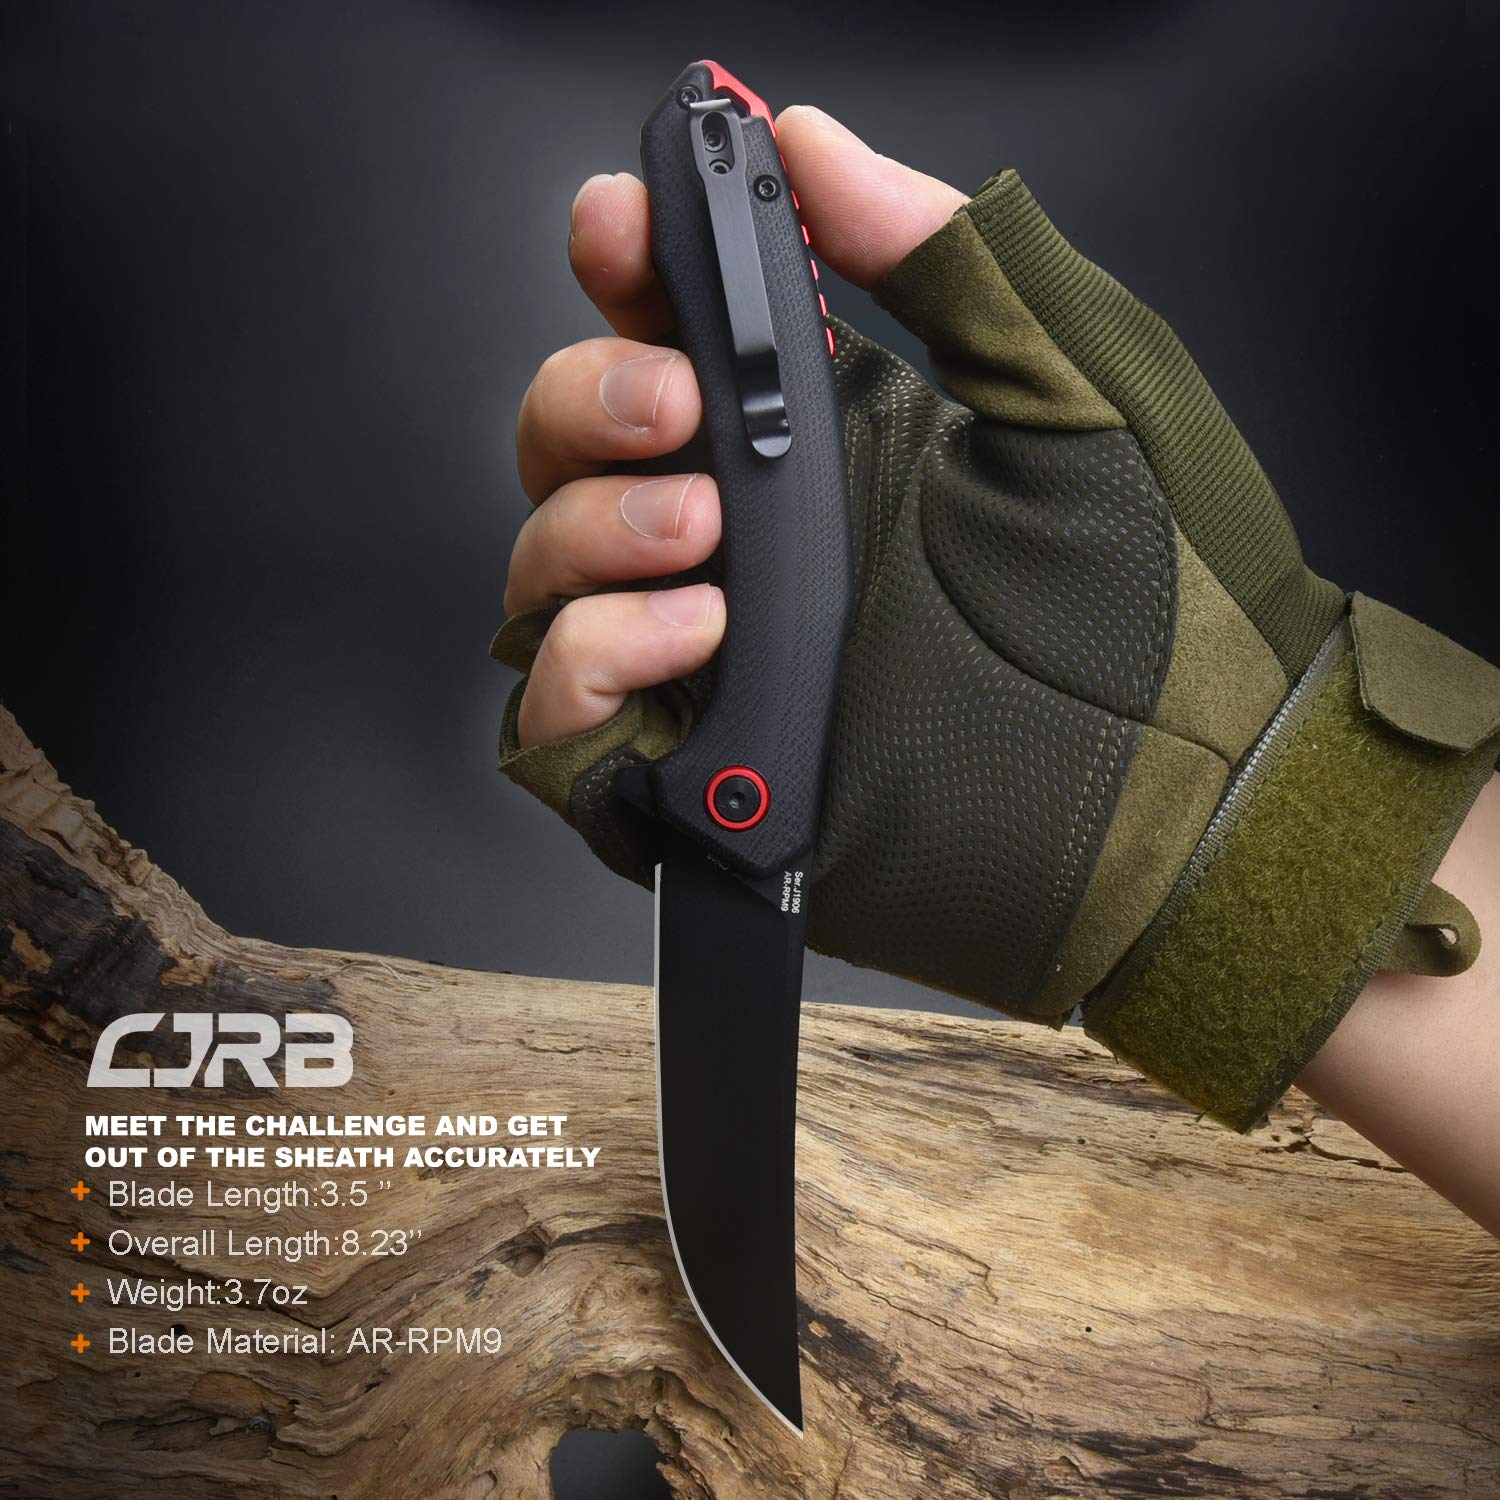 CJRB Tactical Knife, Small Folding Pocket Knife with AR-RPM9 Steel Blade and G10 Handle for Men Outdoor, Survival, Hunting, Camping Gobi(J1906B) Black